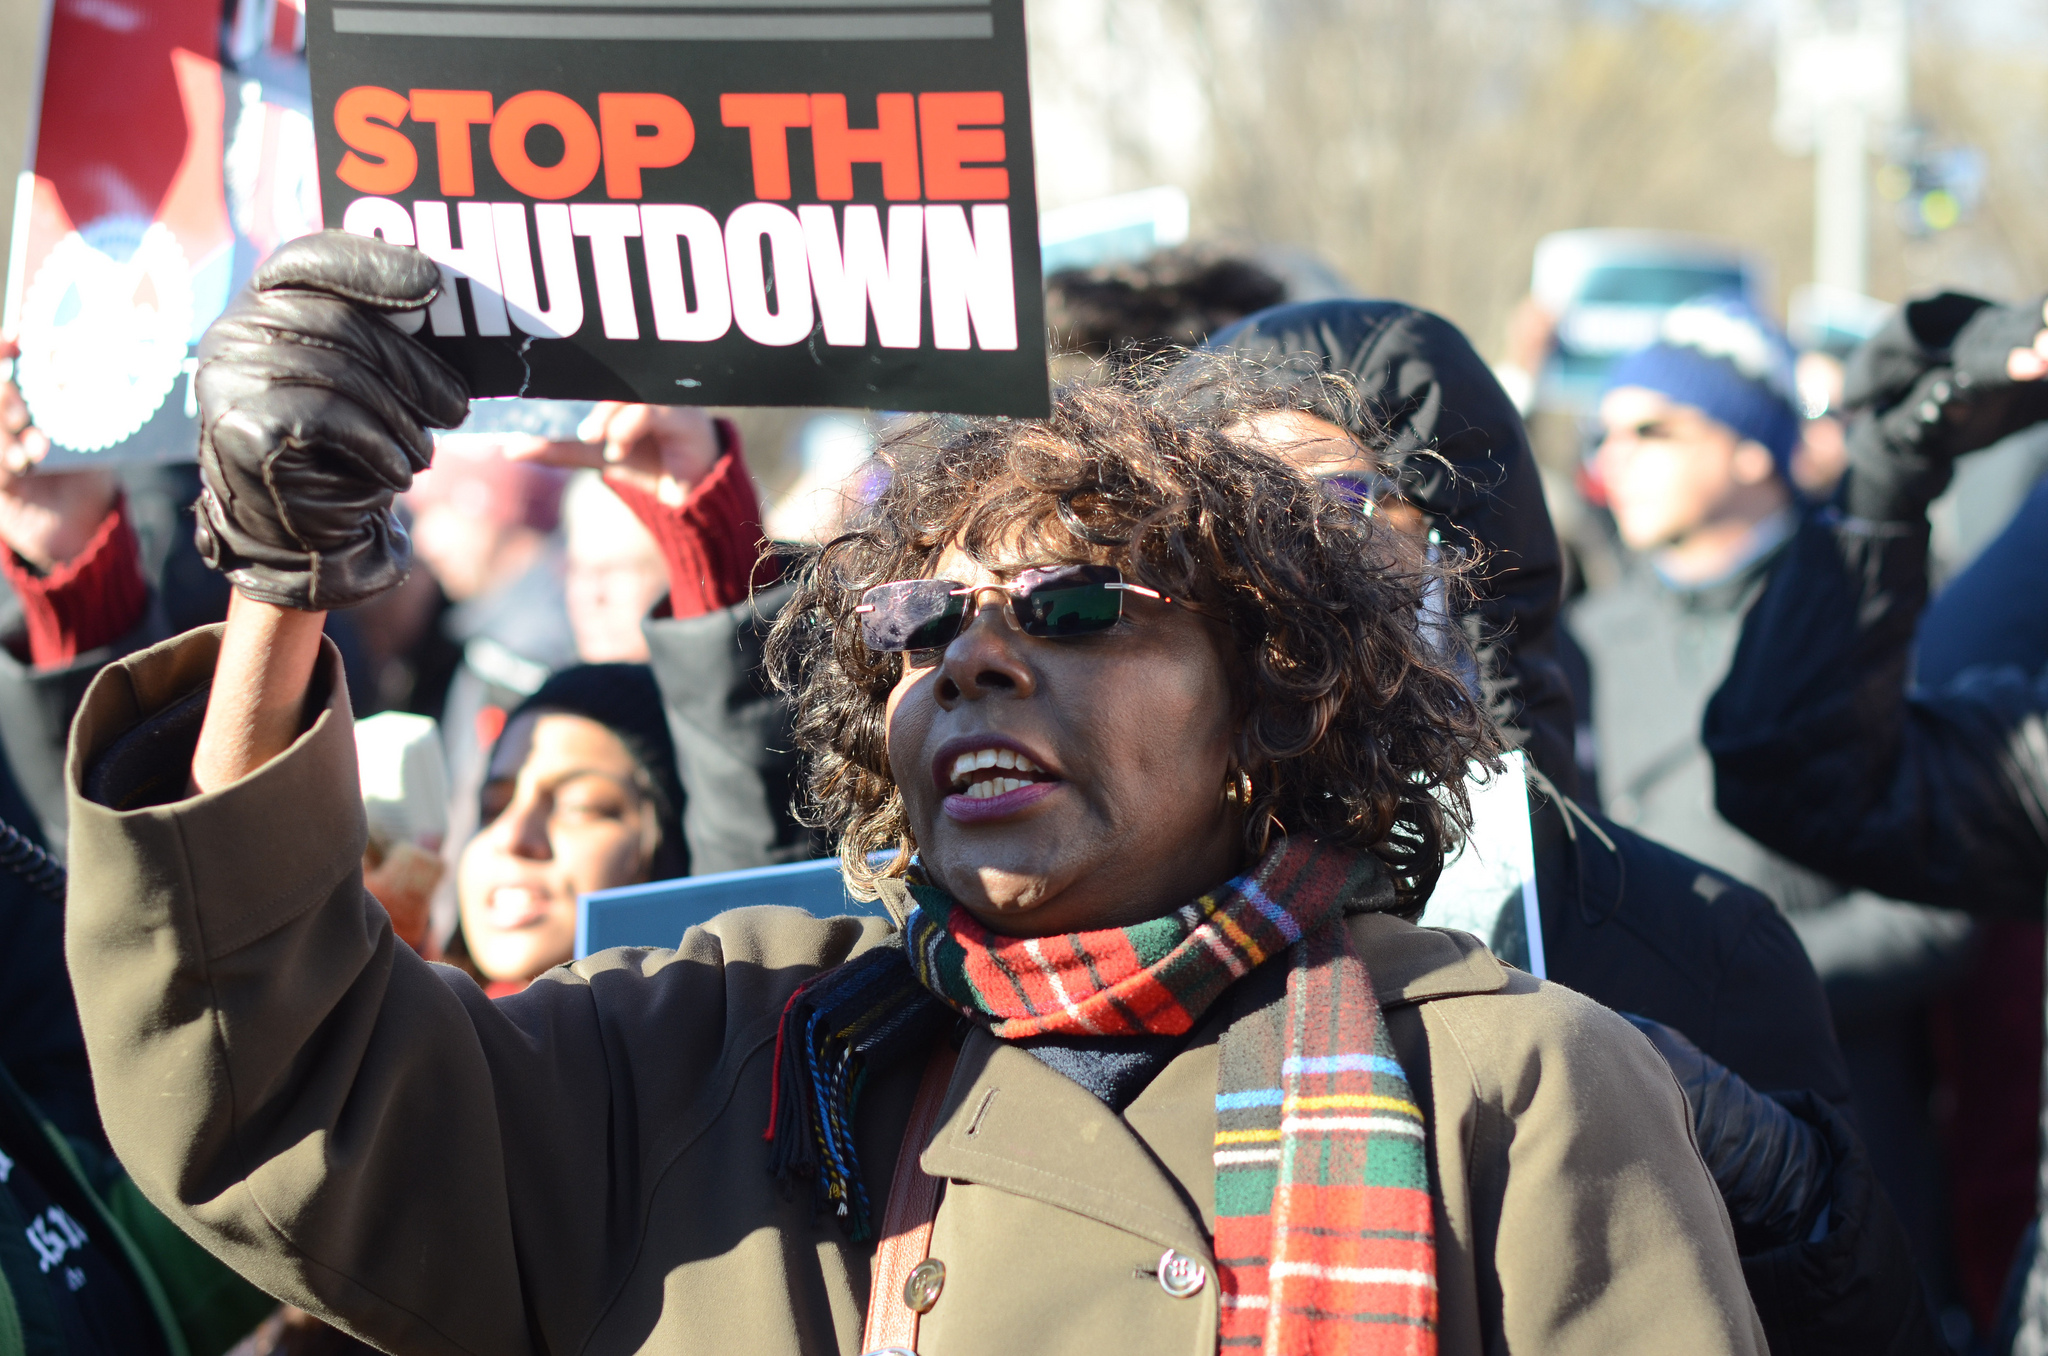 A woman holding a sign that says "stop the shutdown"